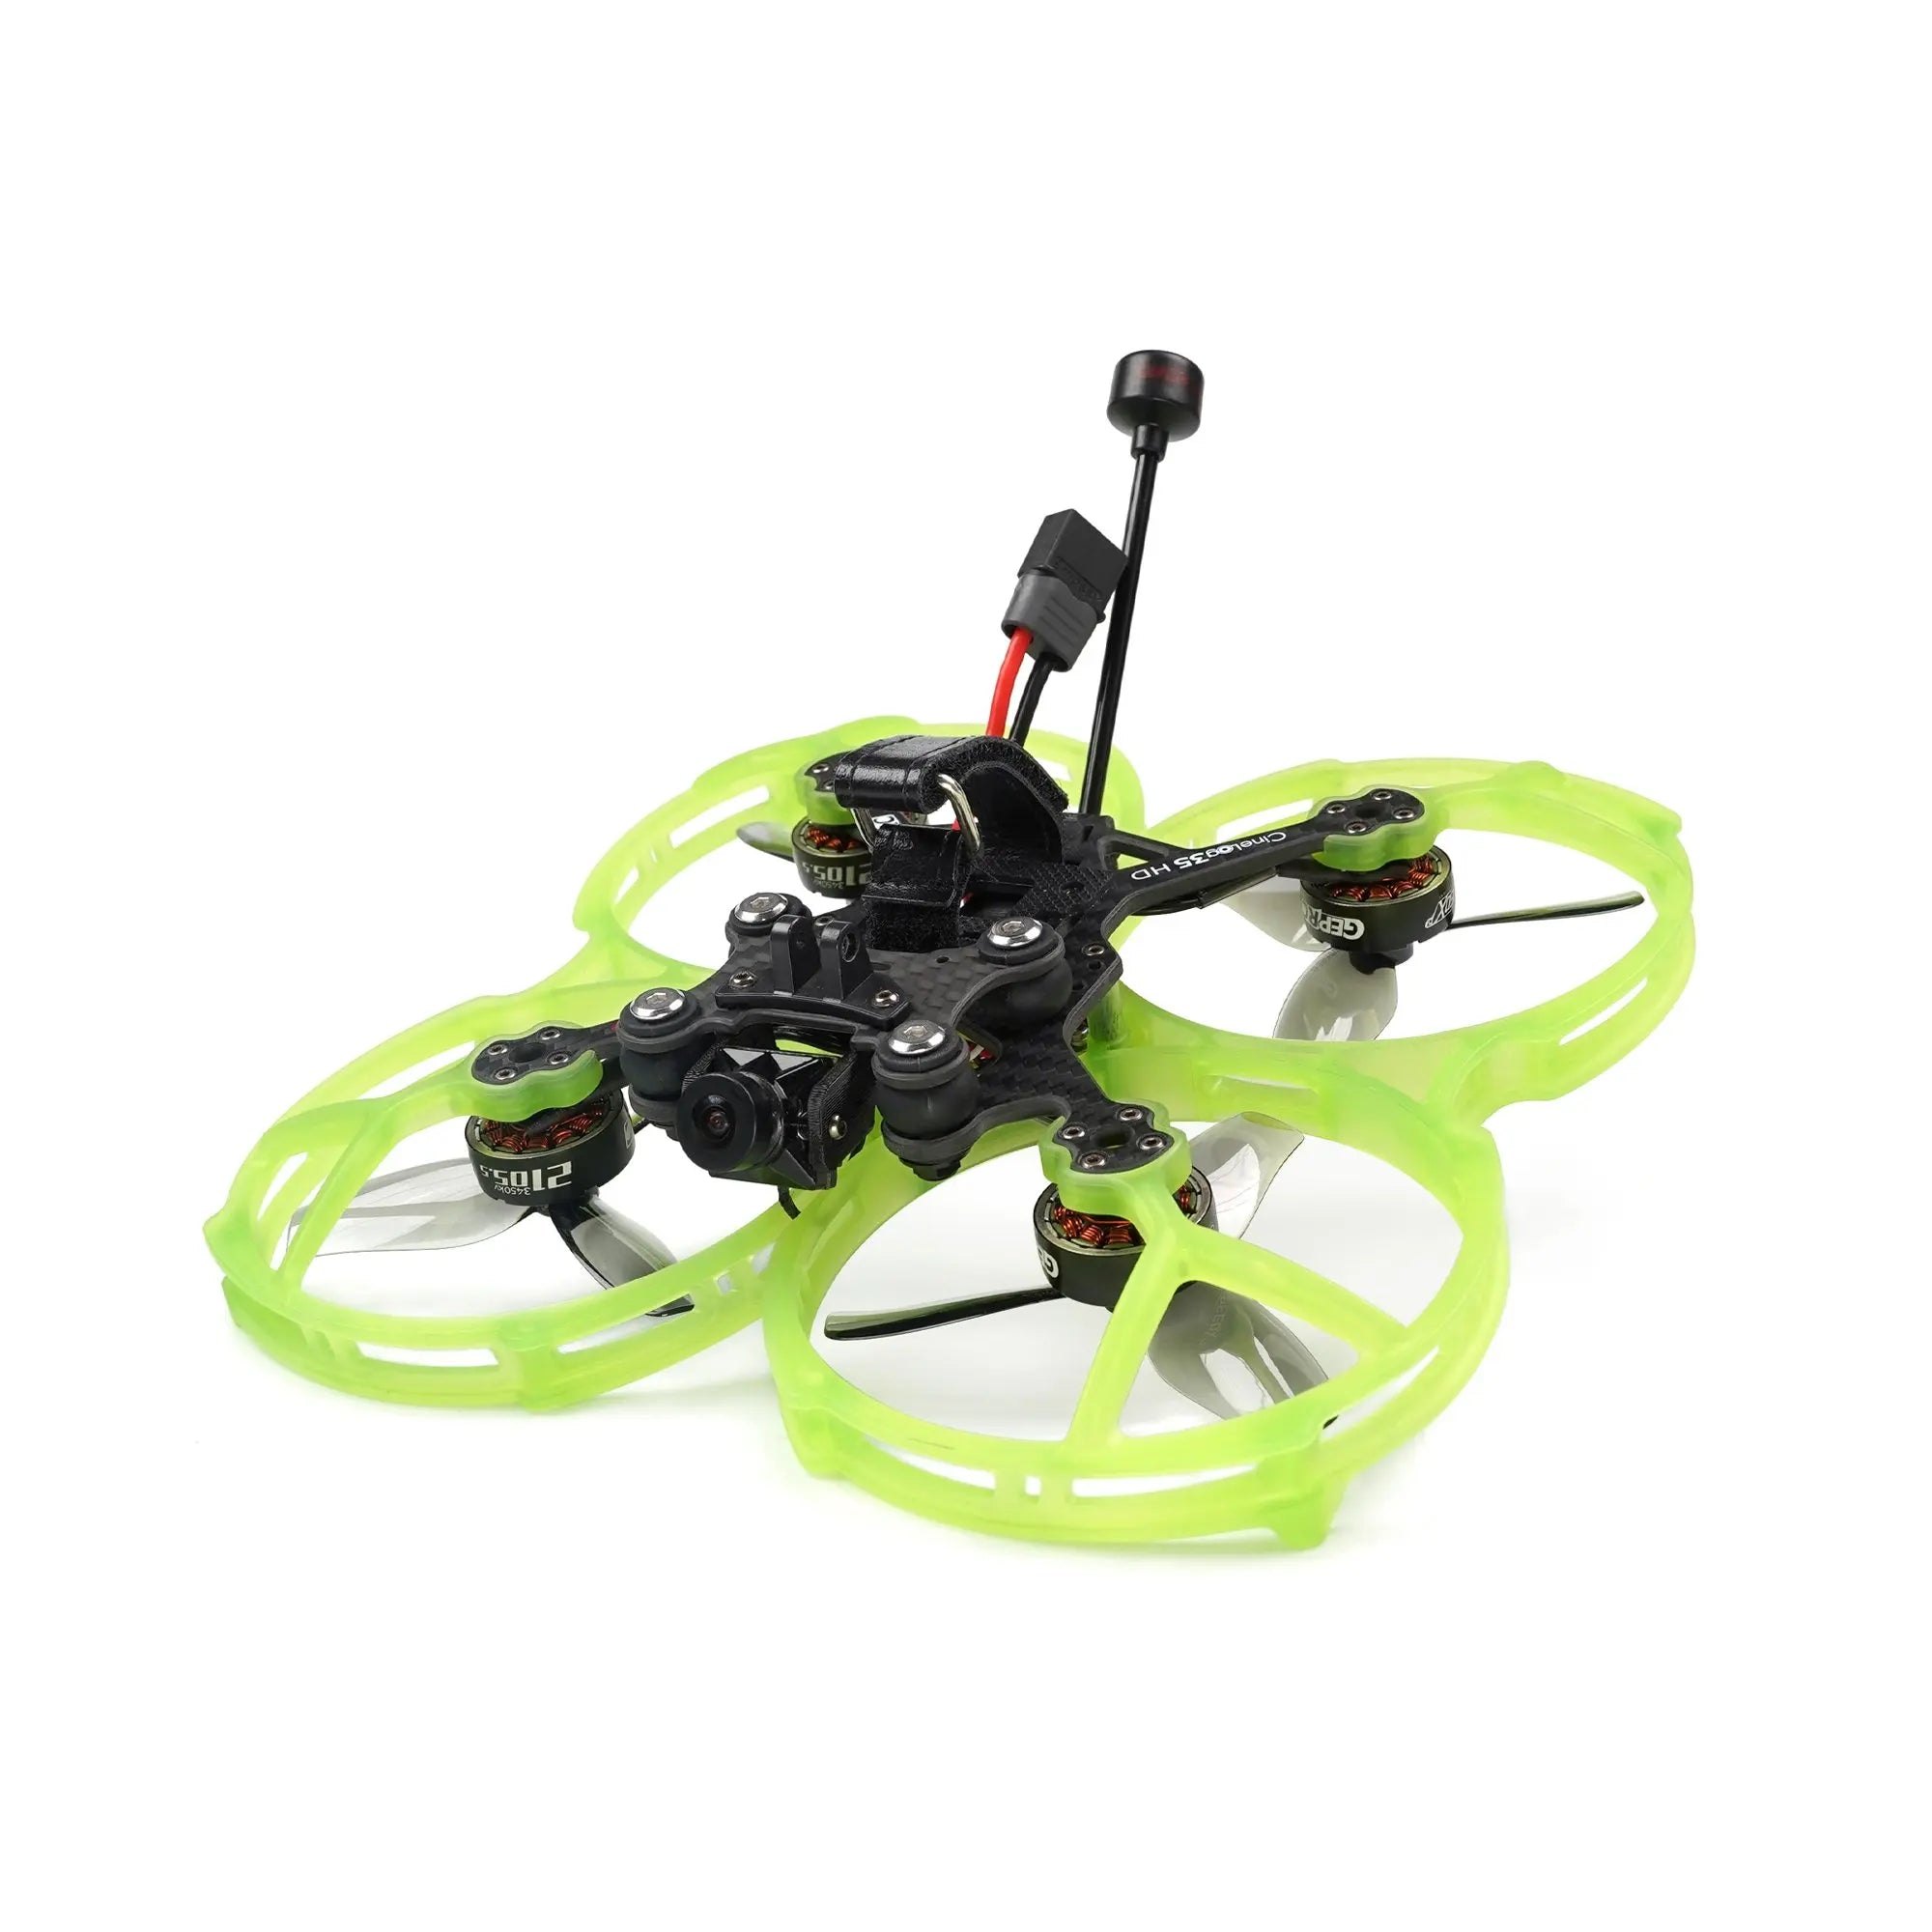 GEPRC CineLog35 FPV Drone, the new SPEEDX2 2105.5 motor has stronger power and faster response speed 